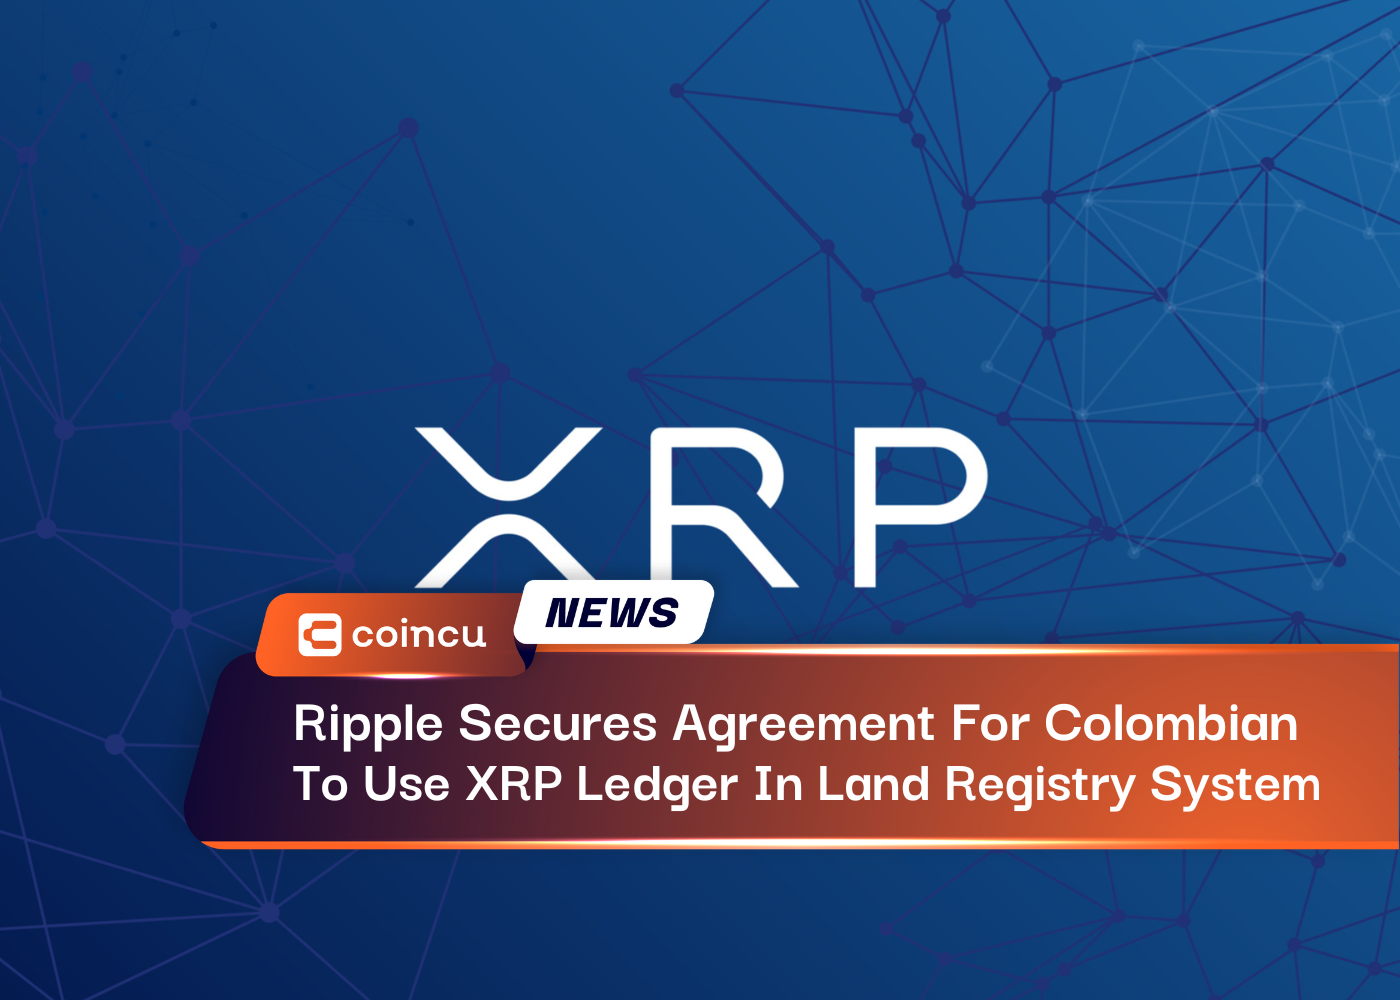 Ripple Secures Agreement For Colombian